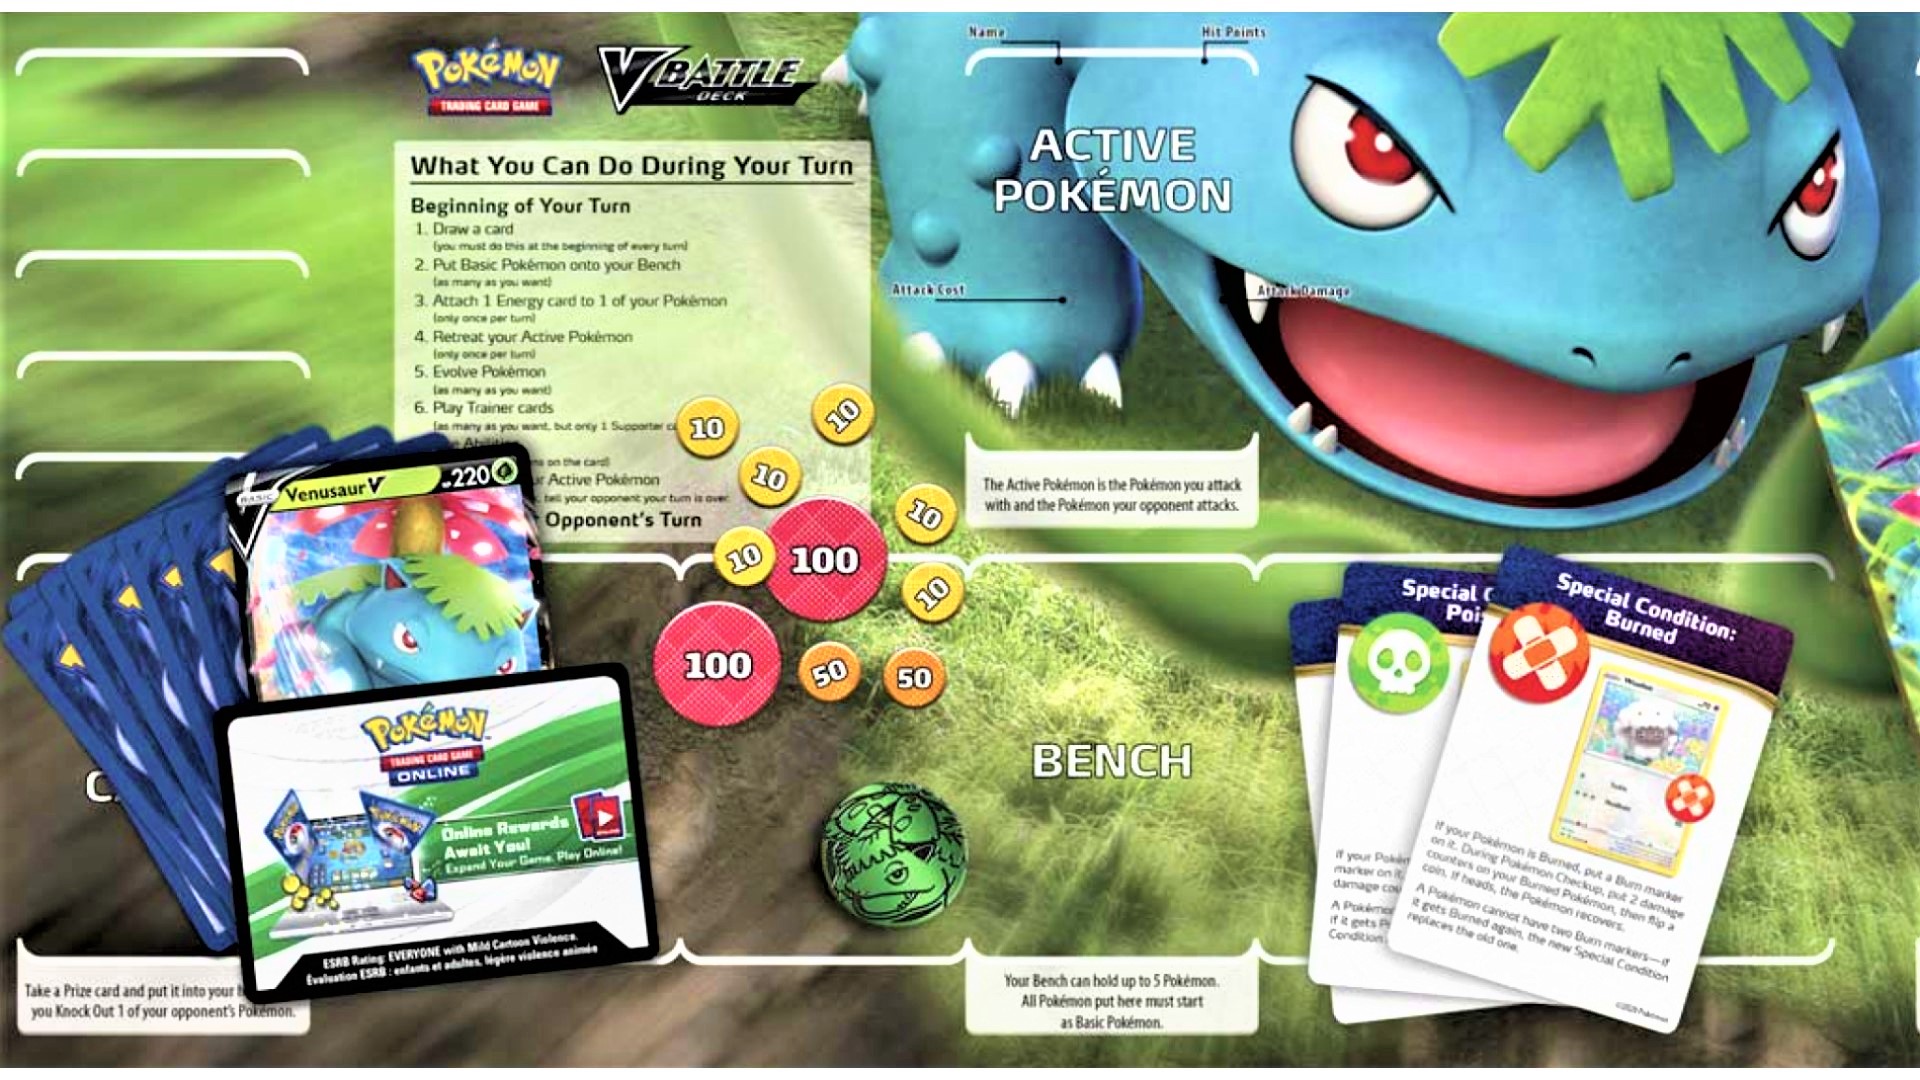 The Pokémon Trading Card Game app is the perfect way to start playing